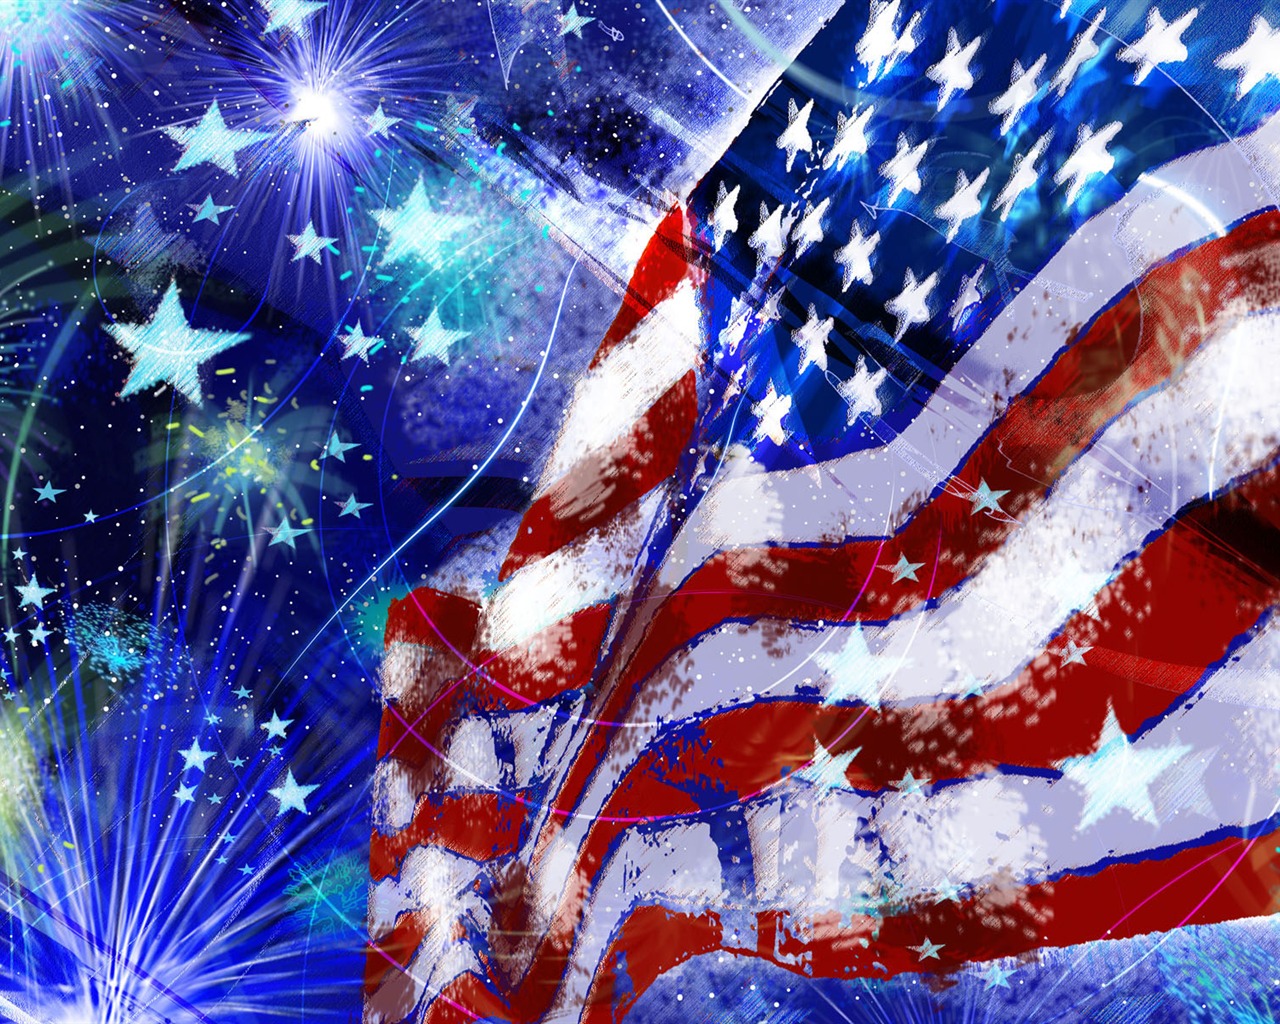 U.S. Independence Day theme wallpaper #39 - 1280x1024